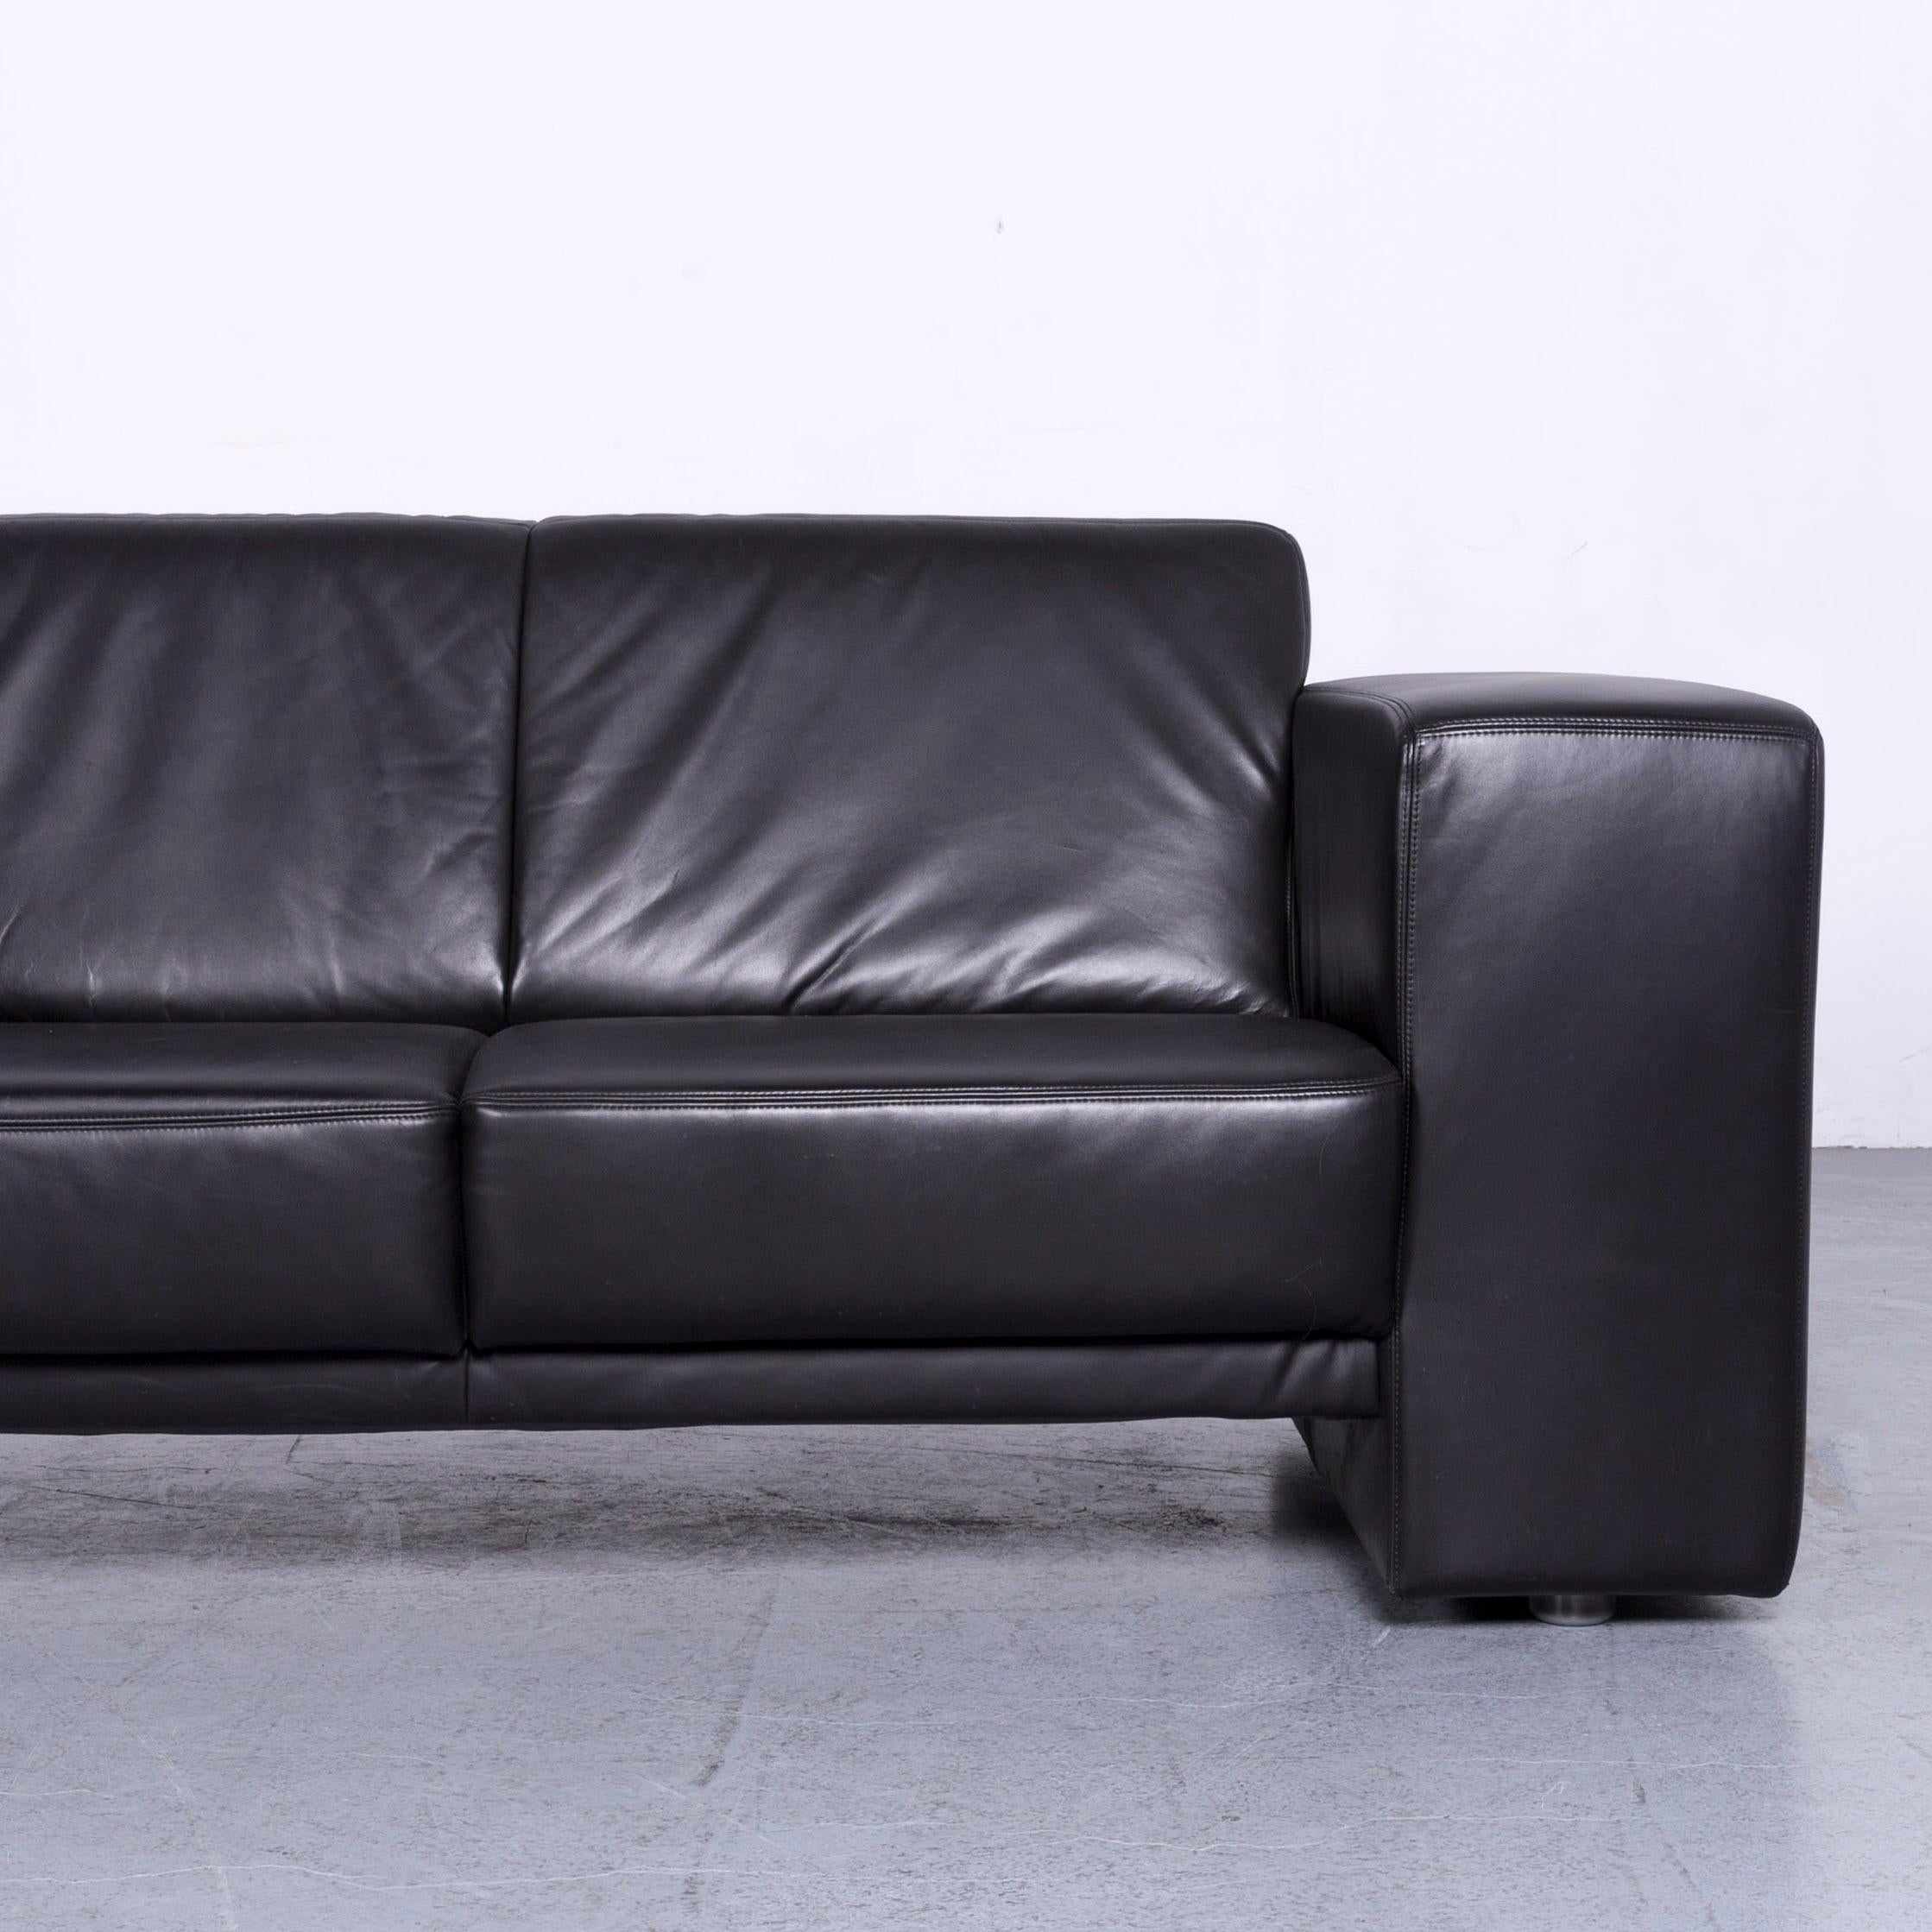 Koinor Designer Leather Sofa Black Two-Seat Couch In Good Condition For Sale In Cologne, DE